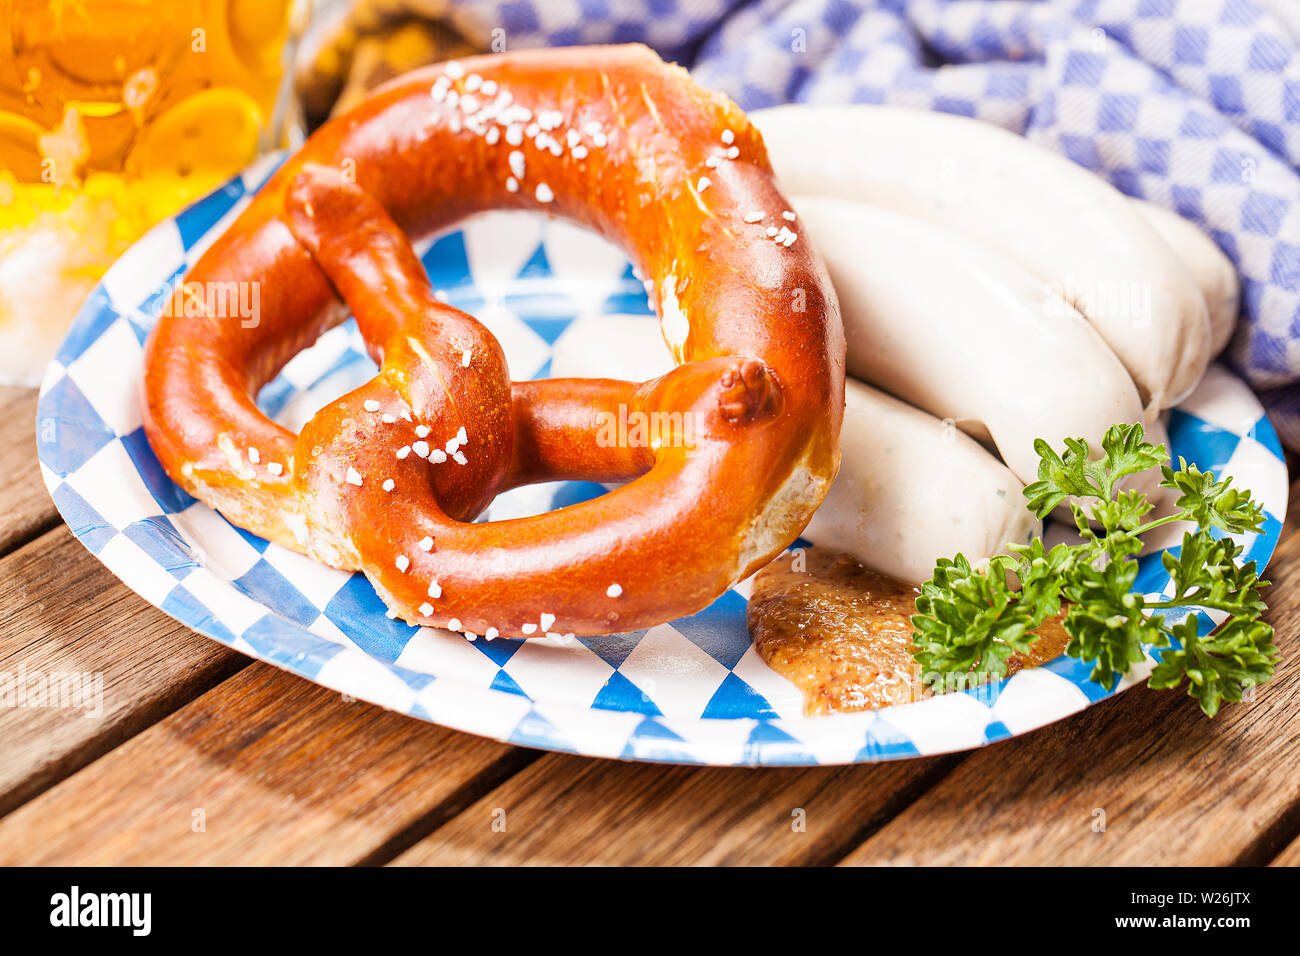 pretzel and white sausage on bavarian style dishes on wooden table Stock Photo